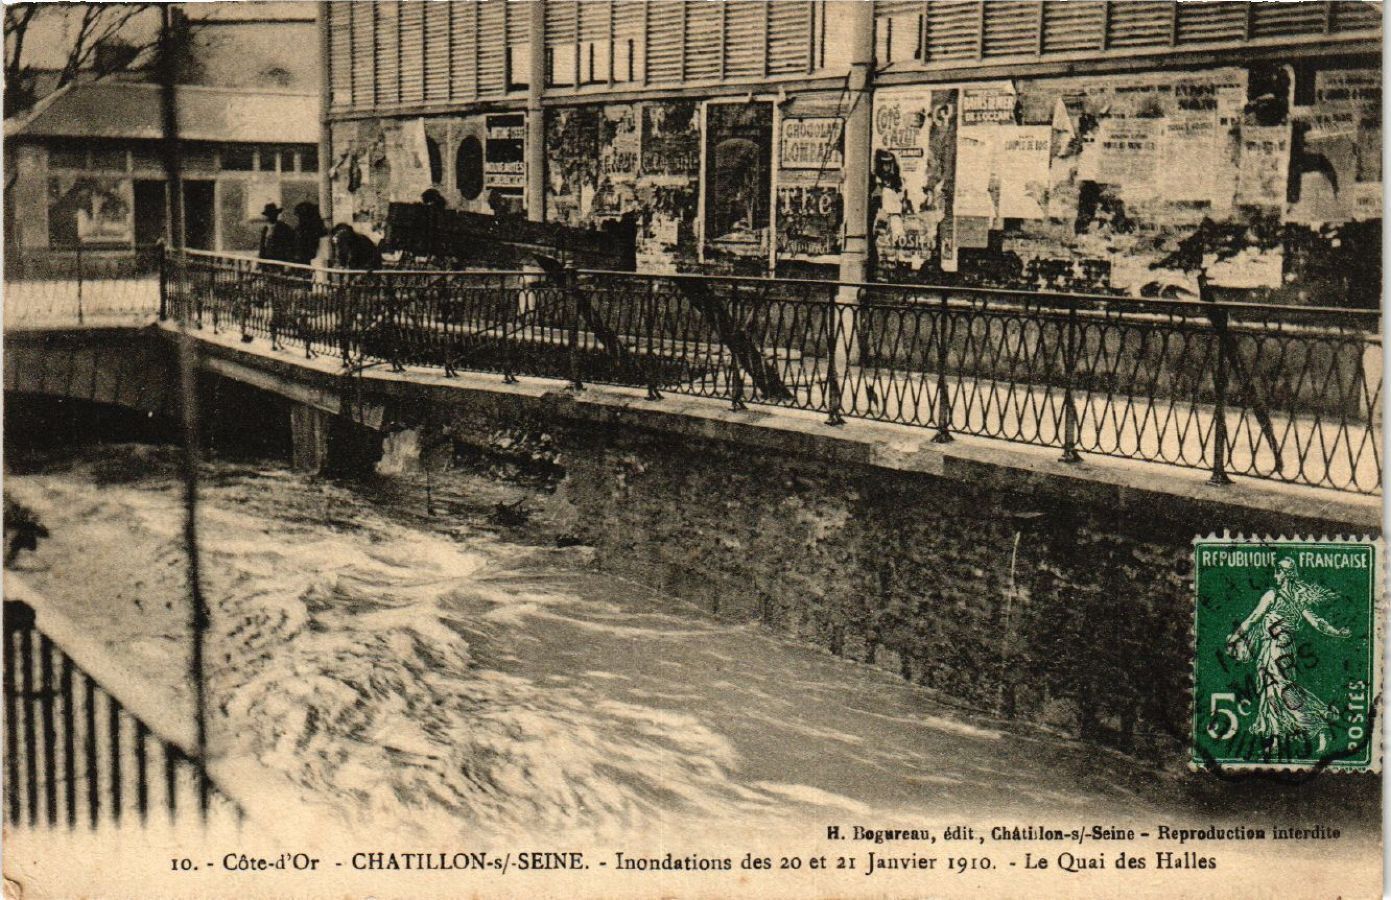 CPA CHATILLON-sur-SEINE - Floods of 20 and 21 Jan.1910 (586698)